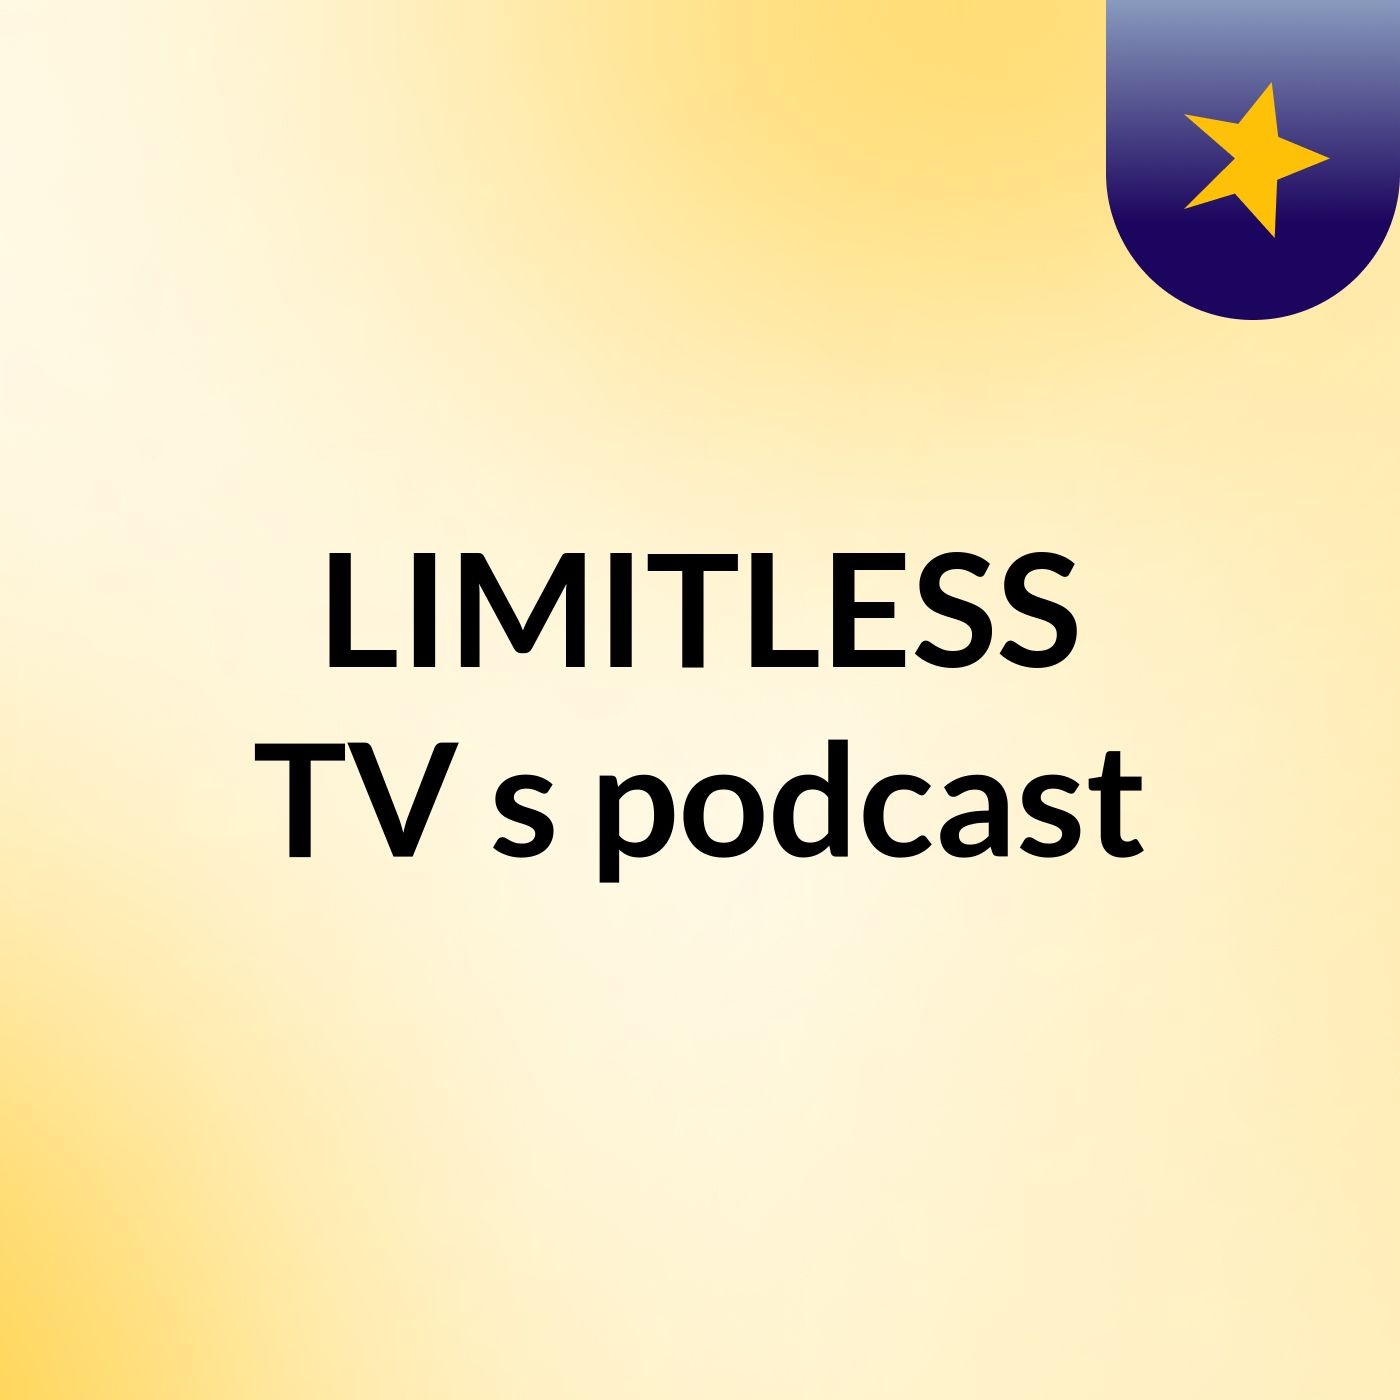 Episode 4 - LIMITLESS TV's podcast